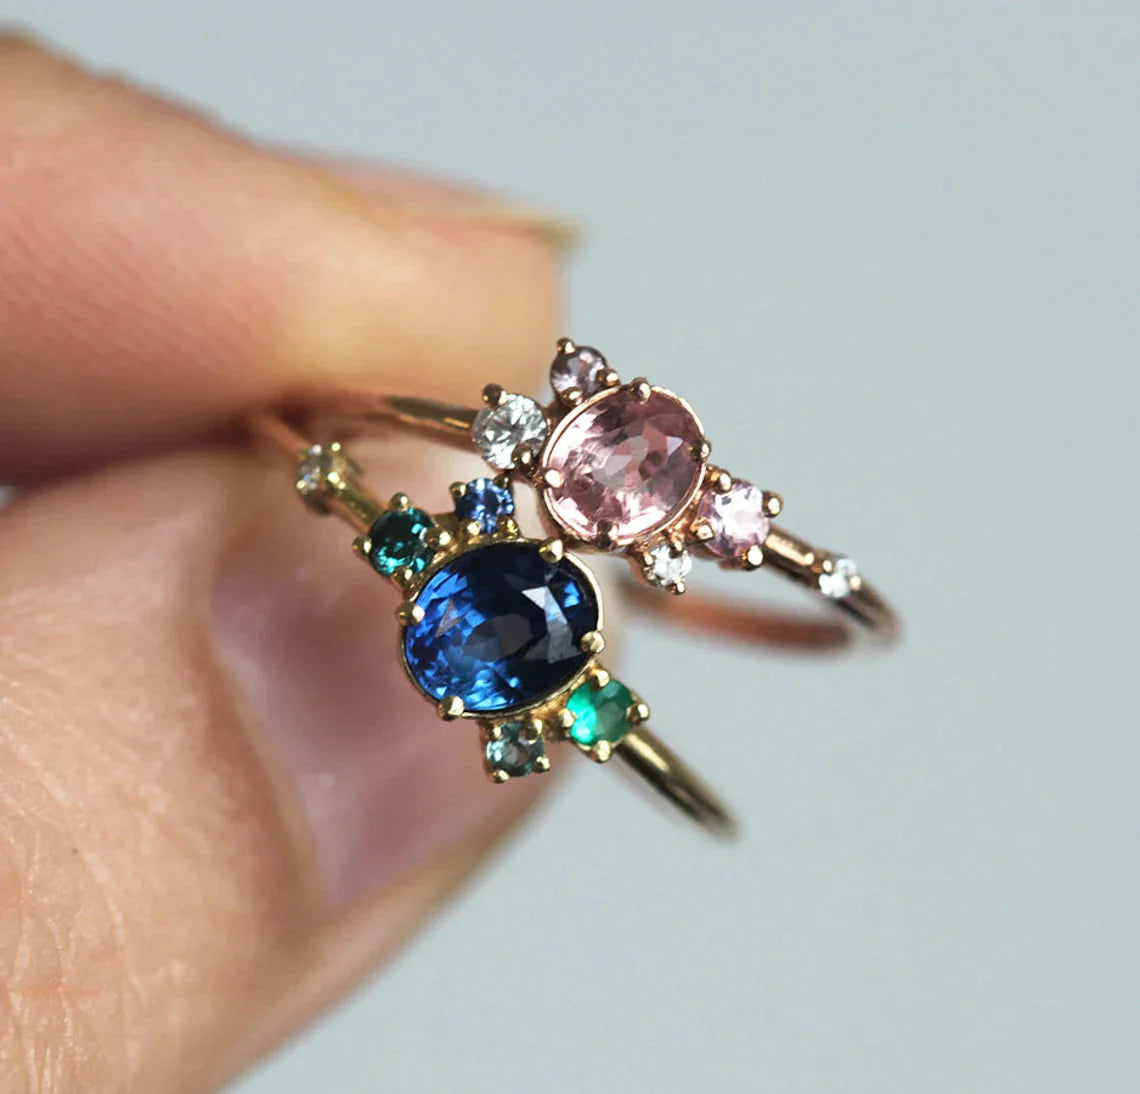 Pink and blue oval sapphire rings with cluster diamonds and amethyst